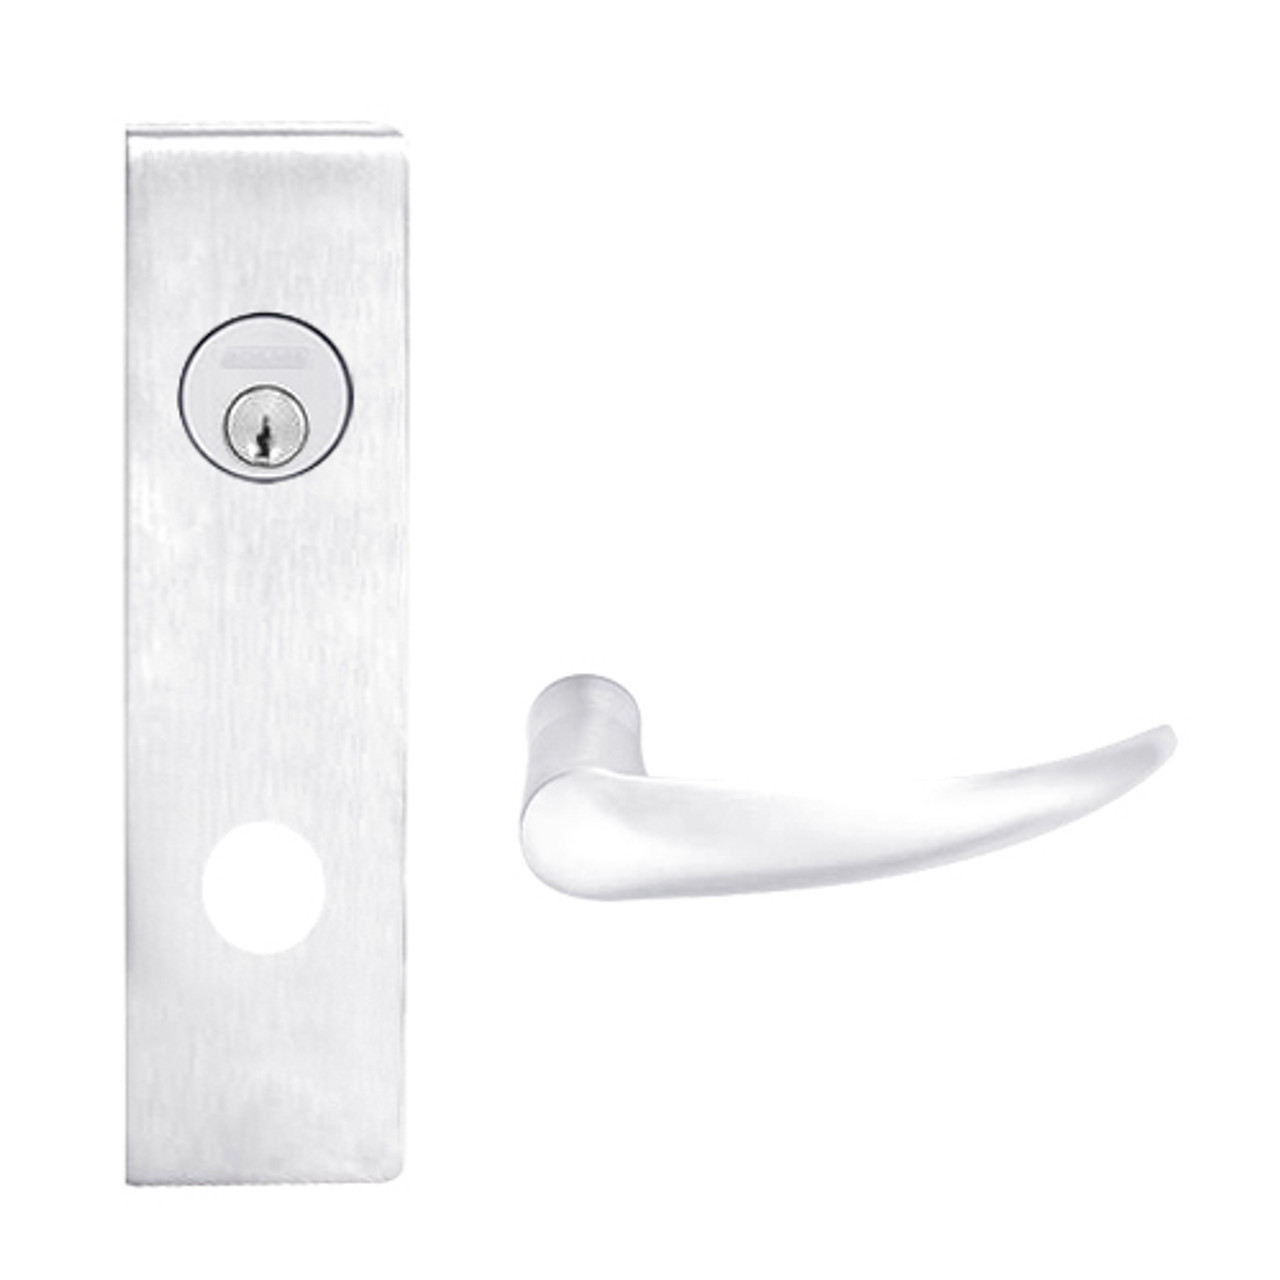 L9026P-OME-N-626 Schlage L Series Exit Lock with Cylinder Commercial Mortise Lock with Omega Lever Design in Satin Chrome